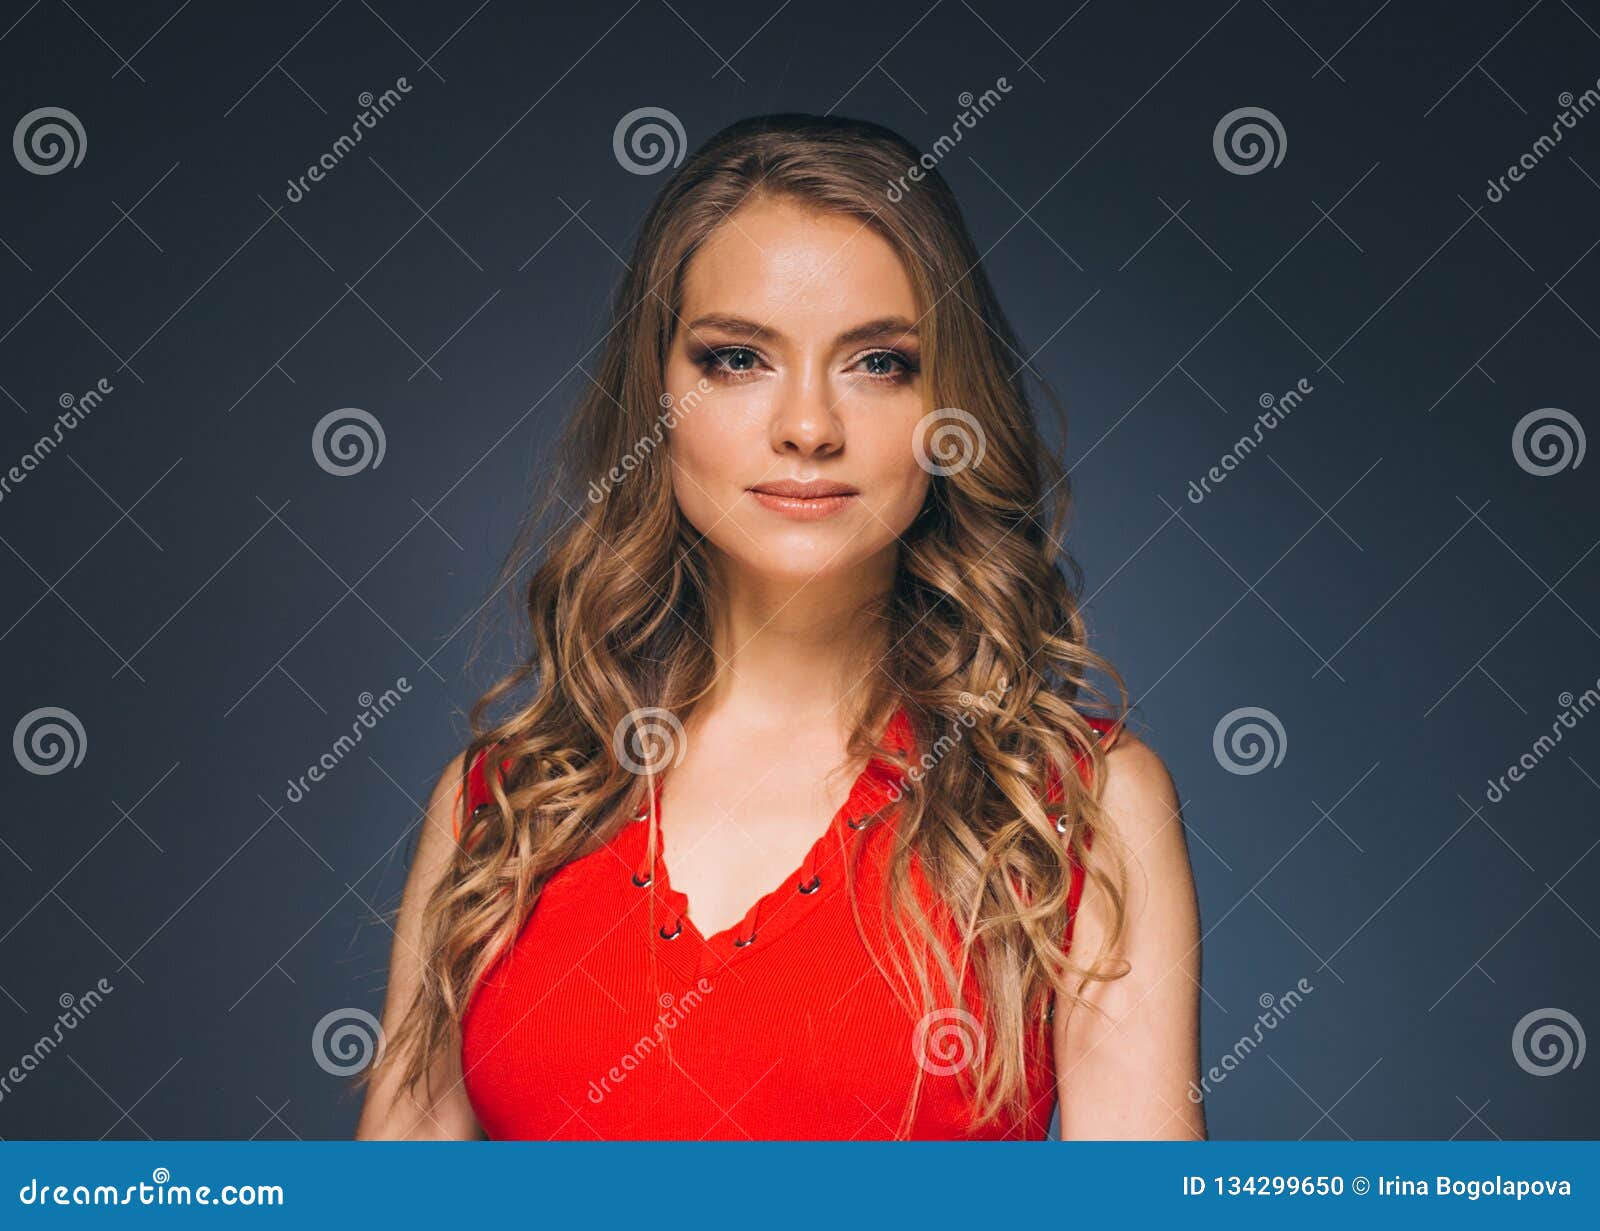 Woman in Red Dress with Long Blonde Hair Stock Photo - Image of fashion ...